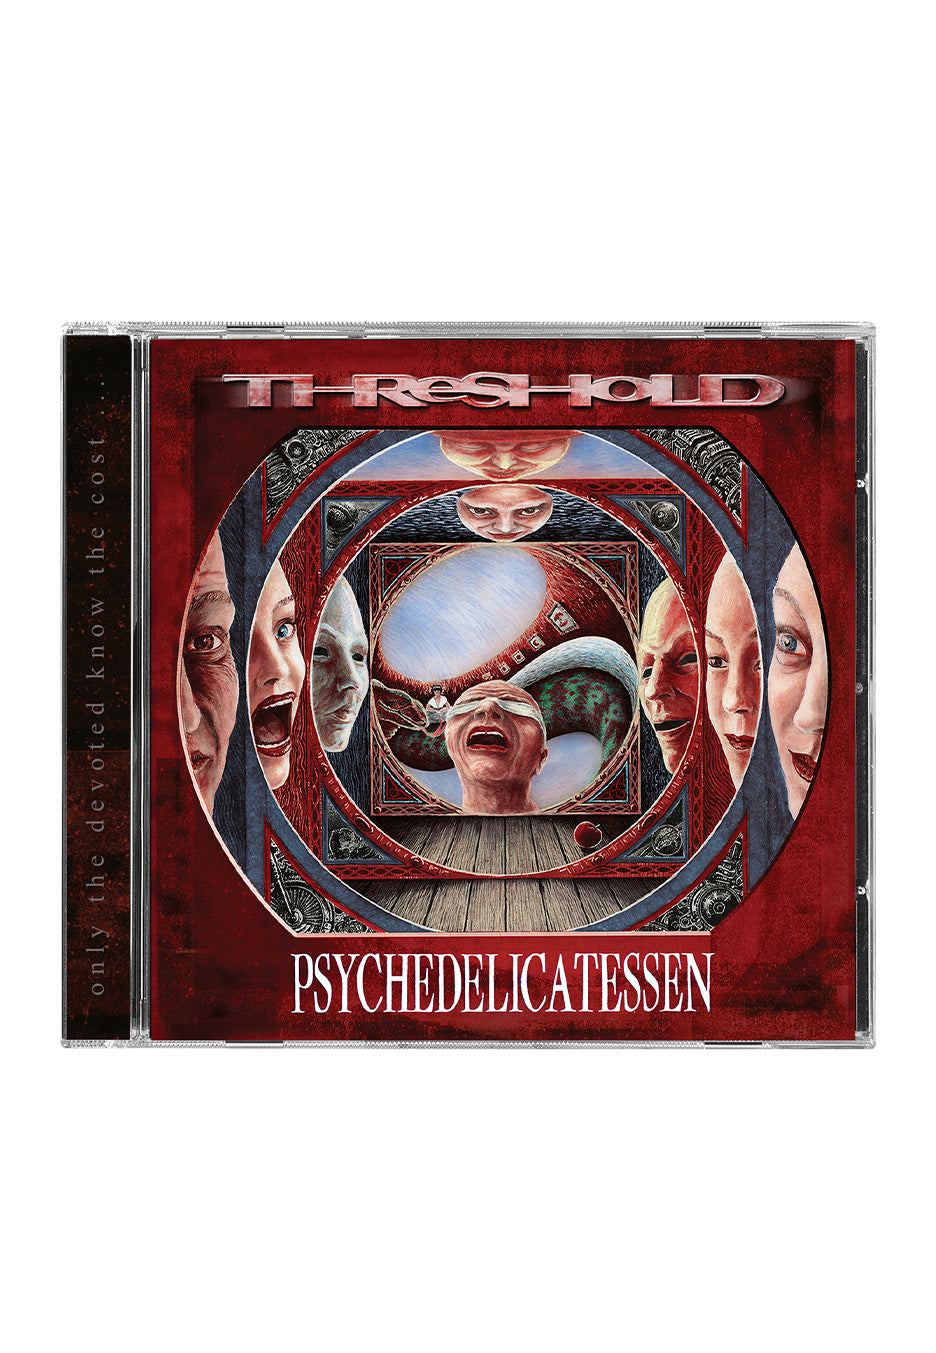 Threshold - Psychedelicatessen (Remixed & Remastered) - CD